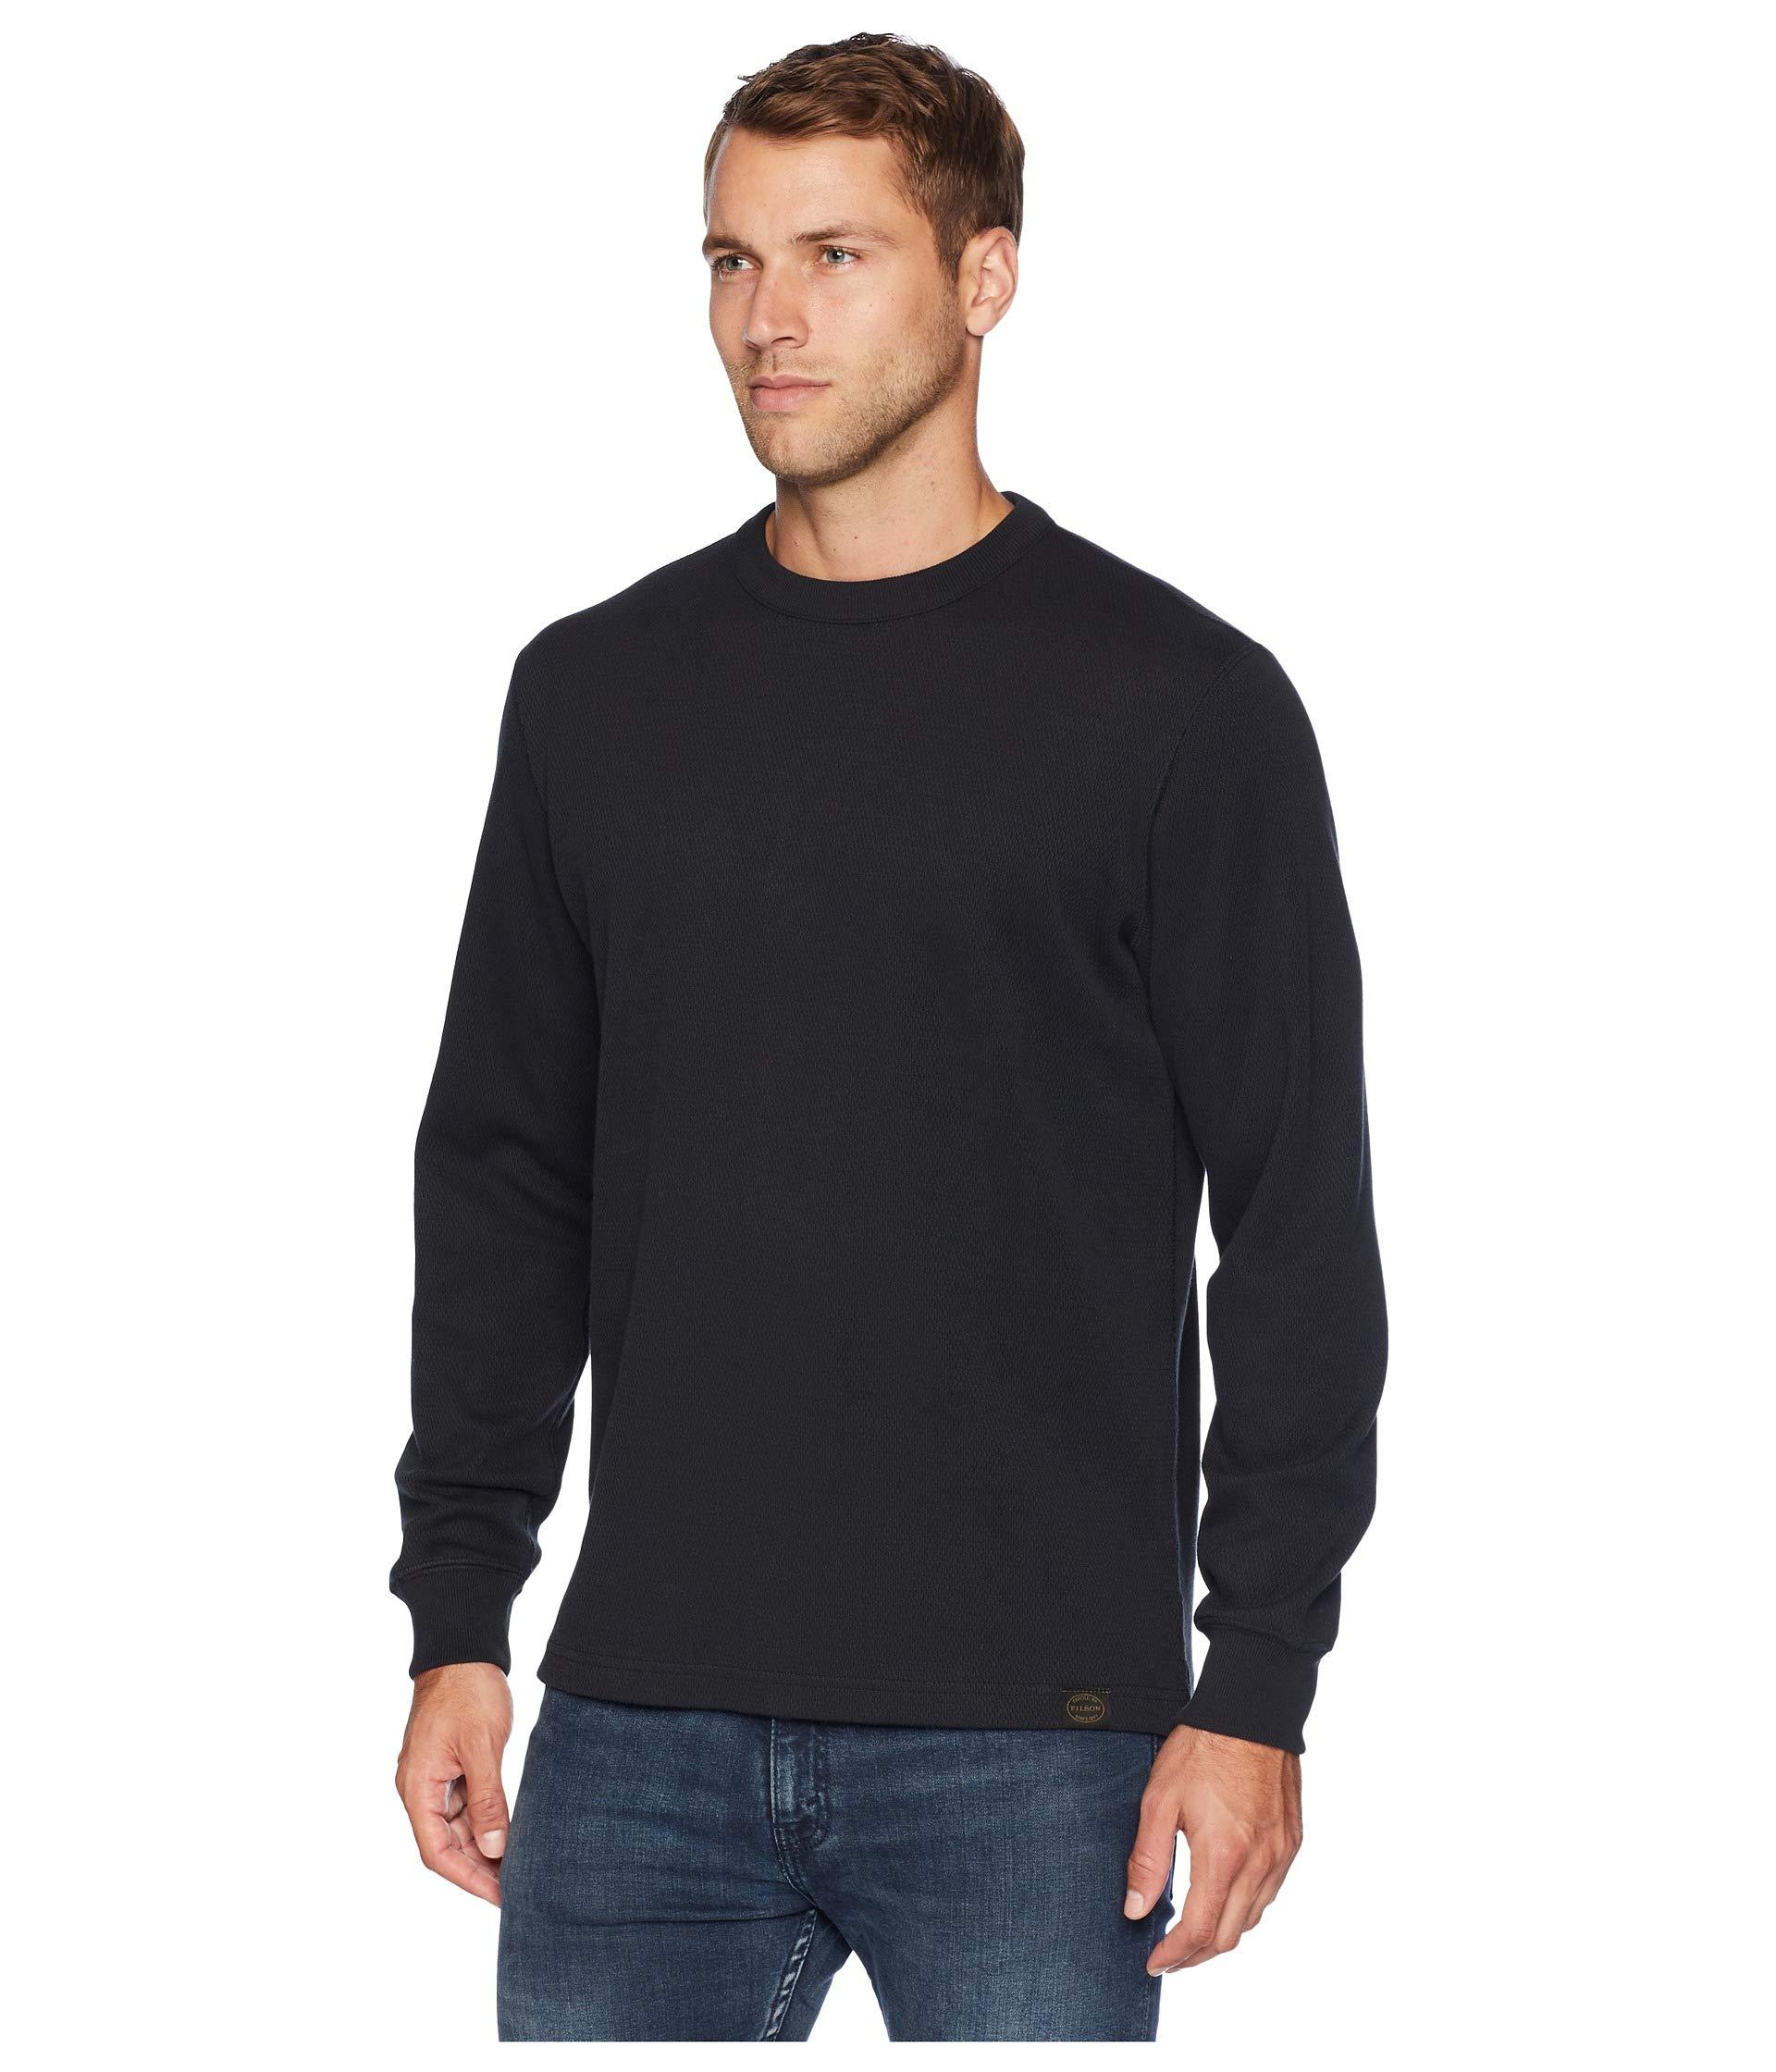 Navy Blue Filson Cotton Waffle Knit Thermal Crew Neck